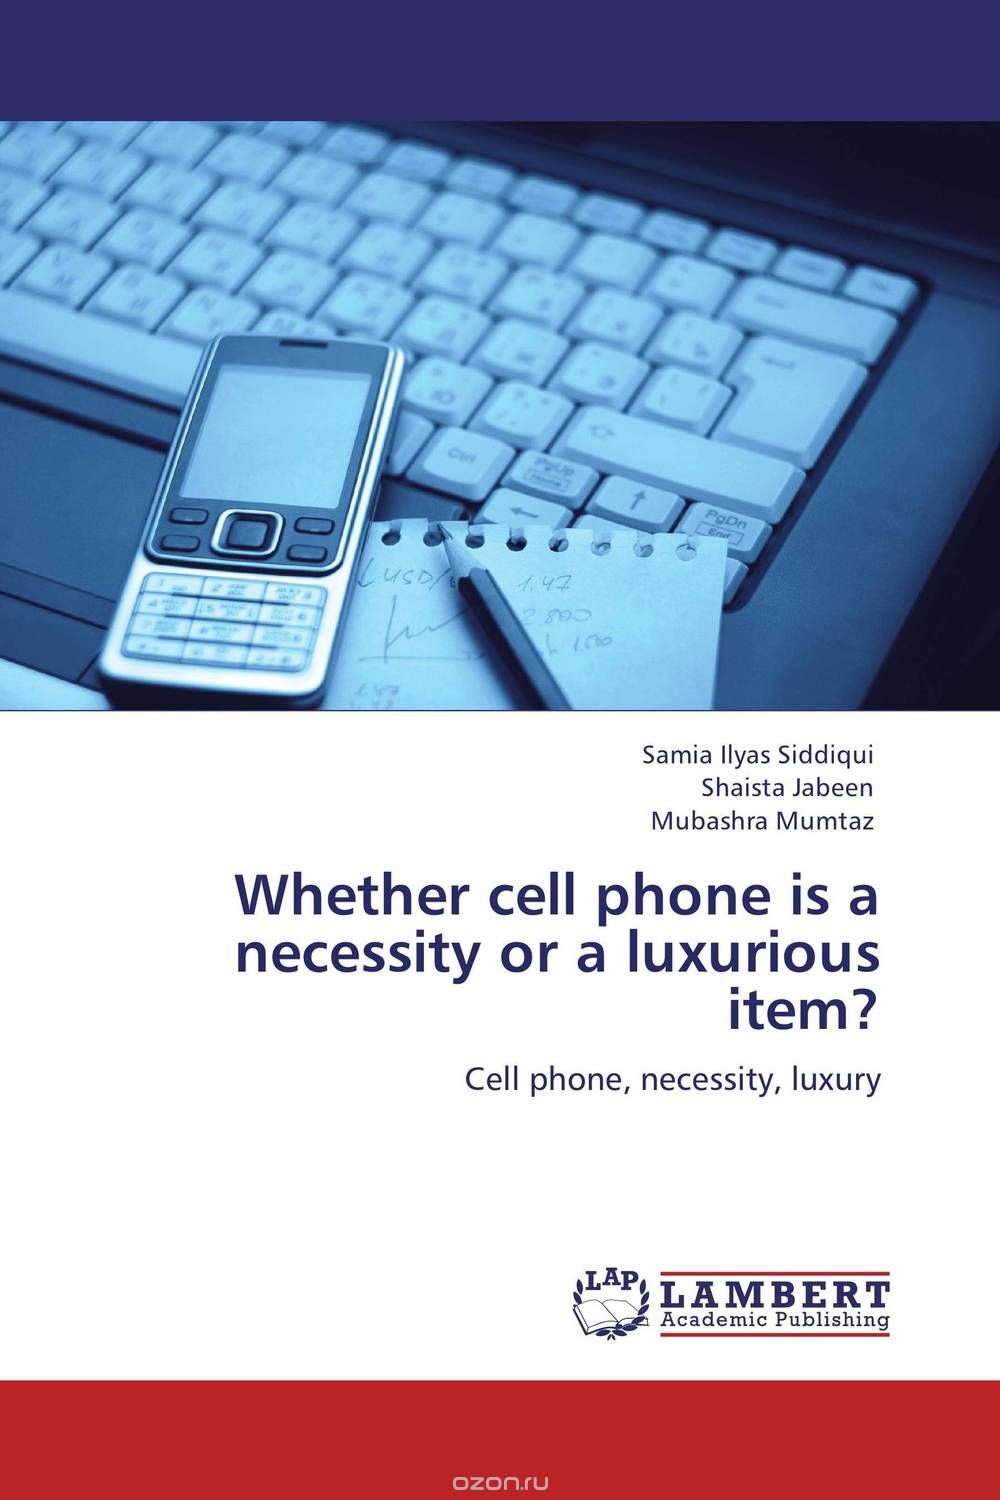 Скачать книгу "Whether cell phone is a necessity or a luxurious item?"